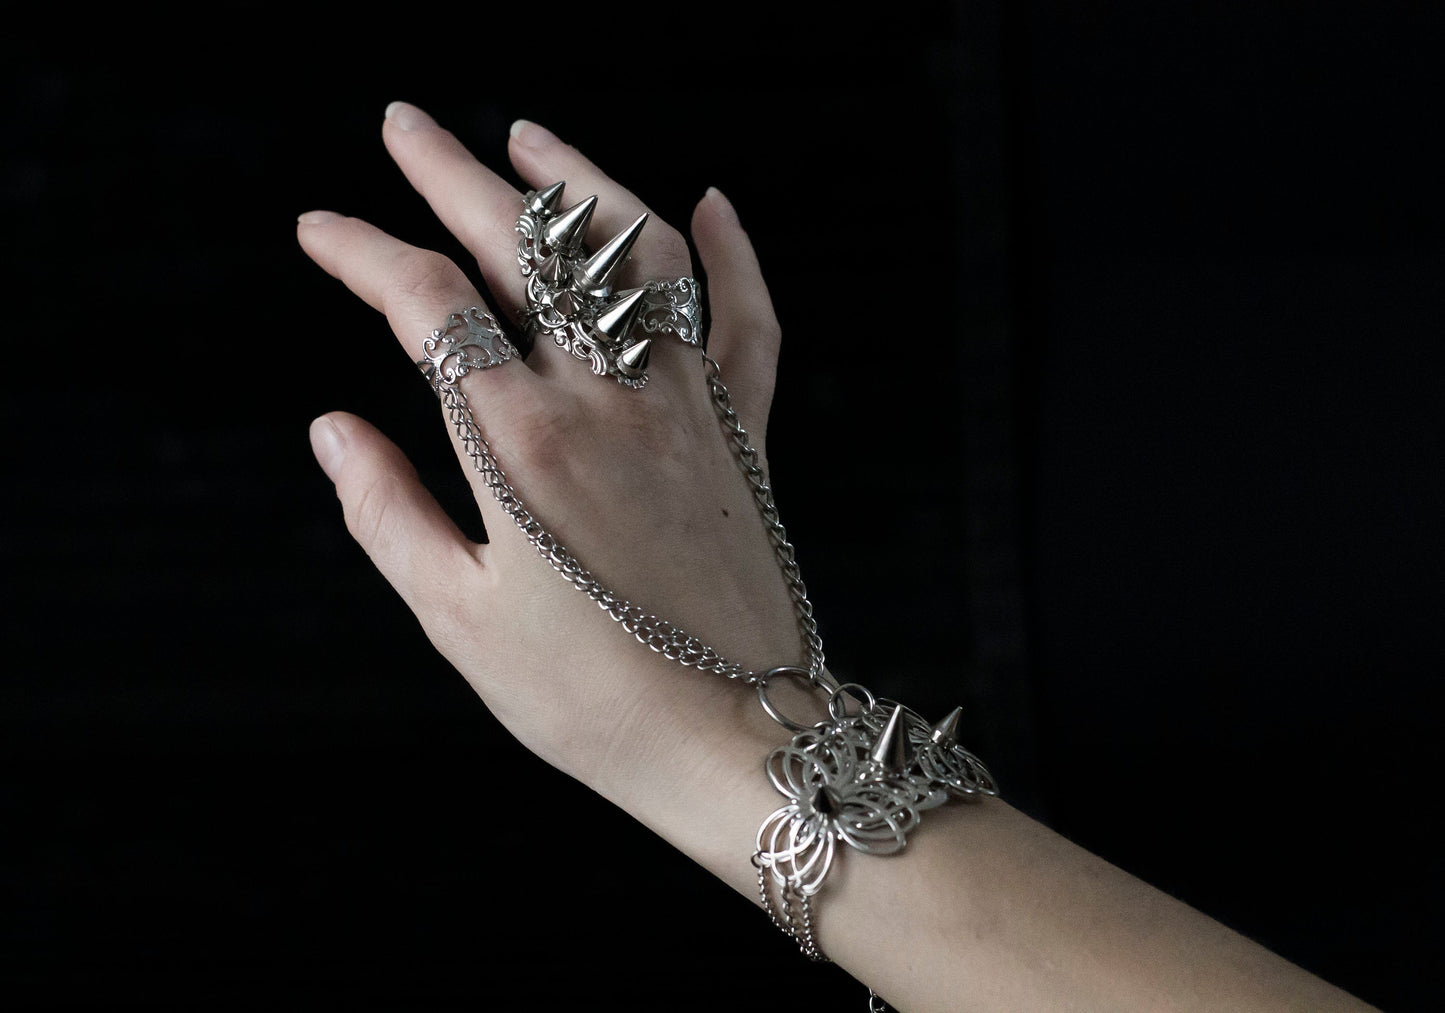 Capture the essence of punk rebellion with Myril Jewels' edgy studded ring and matching hand chain bracelet ring. These bold statement pieces, with its sharp studs and metallic finish, are a must-have for lovers of dark-avantgarde and gothic accessories. Ideal for Halloween, it also complements everyday minimal goth looks, Witchcore styles, and Gothic-chic ensembles, offering a versatile addition to any Neo Gothic jewel collection